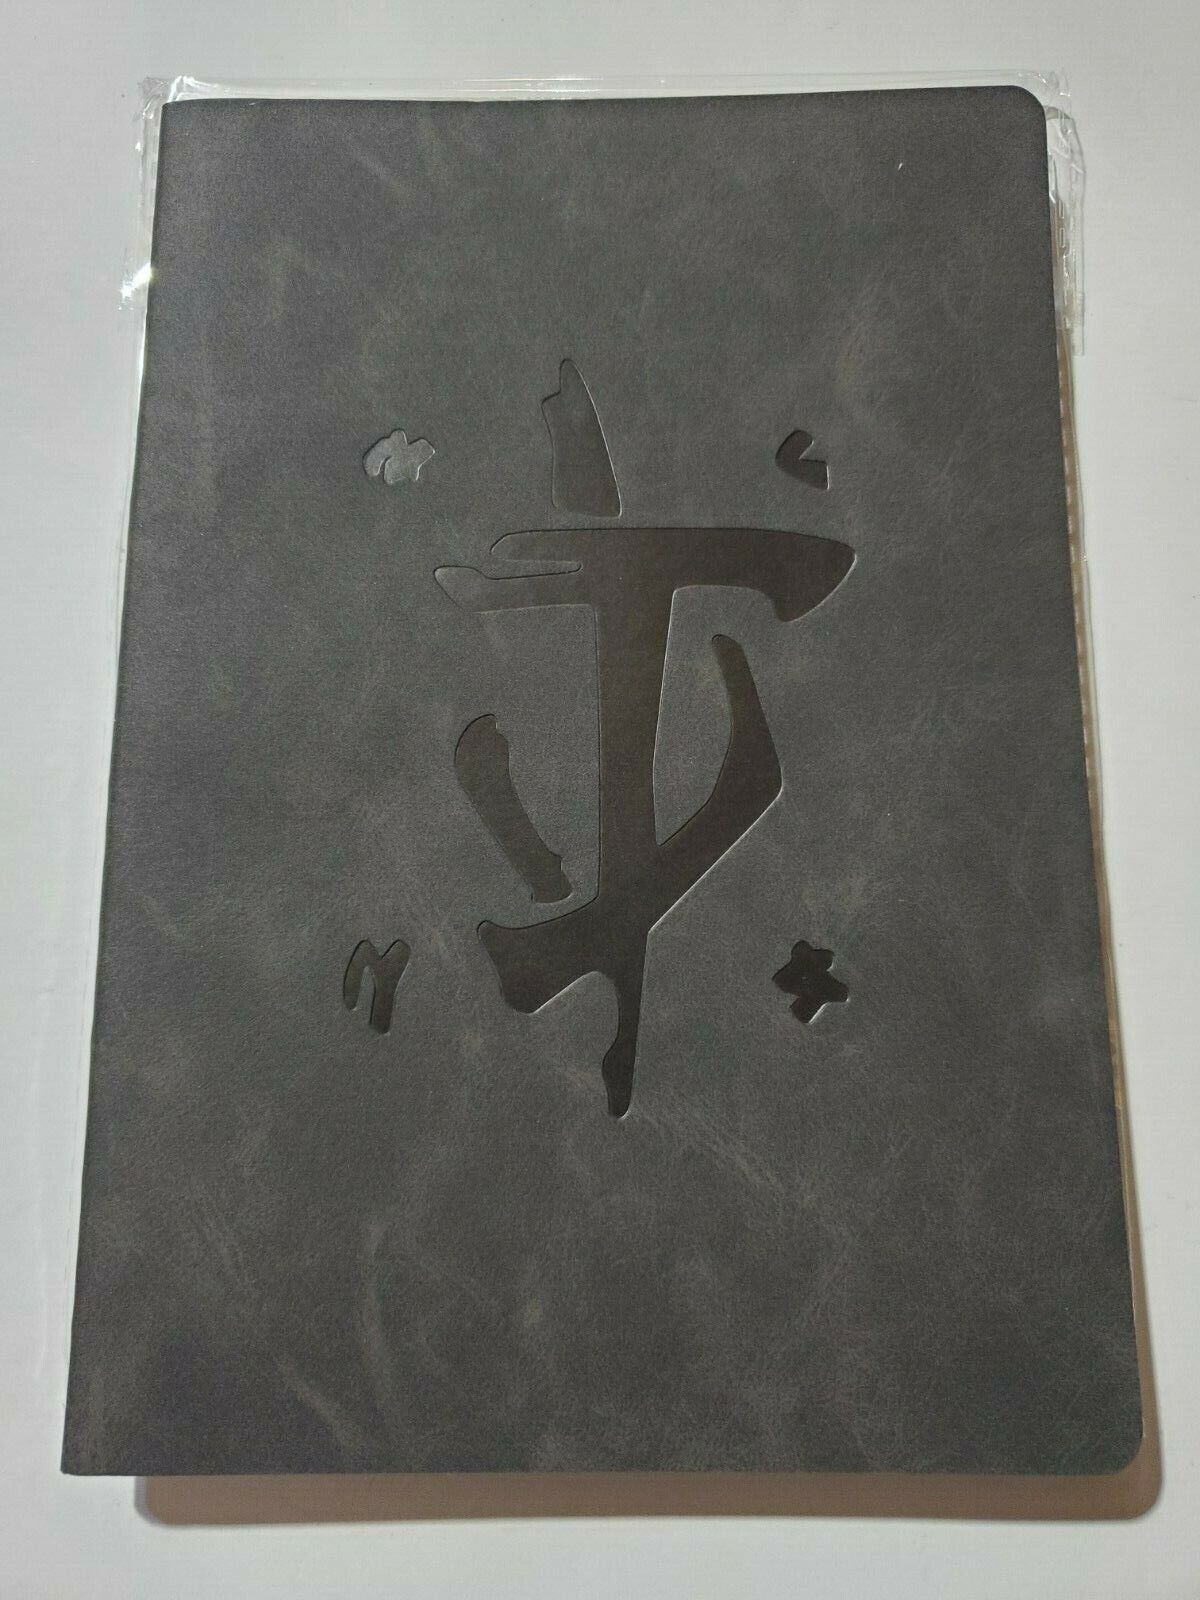 DOOM Eternal Collector's Edition Lore Art Book Journal by ID Software *NEW* Без бренда